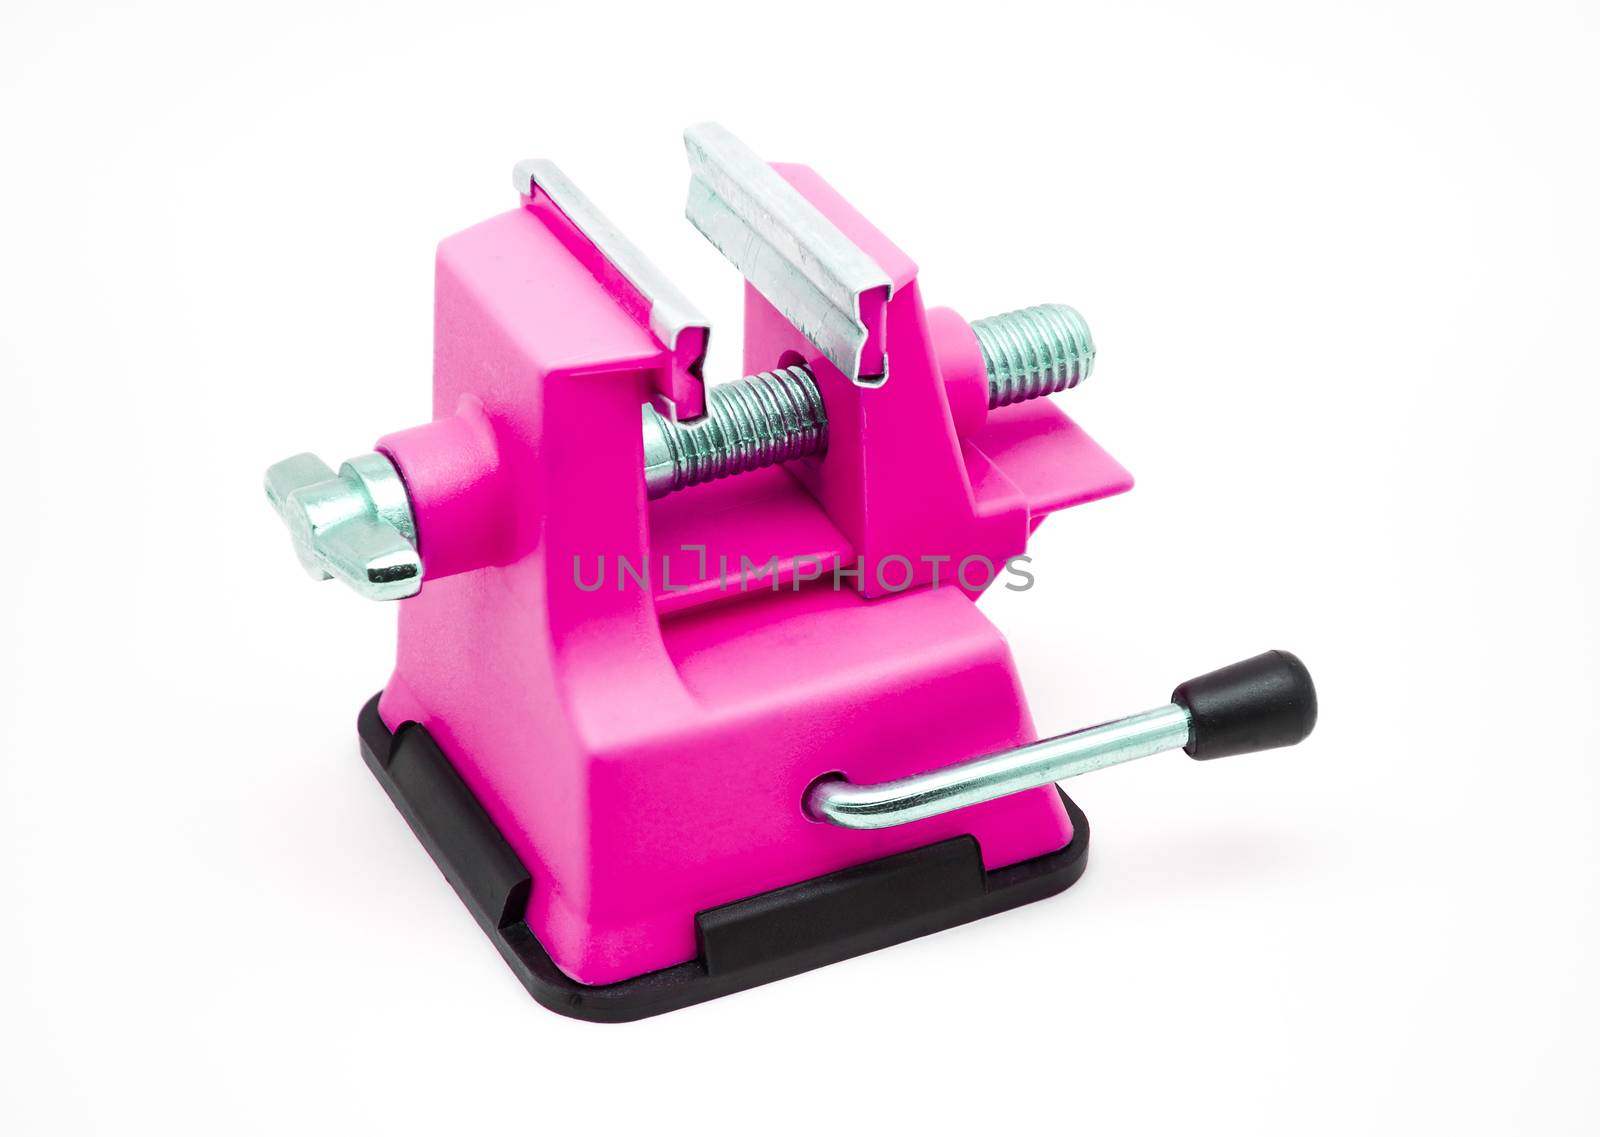 Magenta Plastic Bench Vise with Suction Cup by noneam